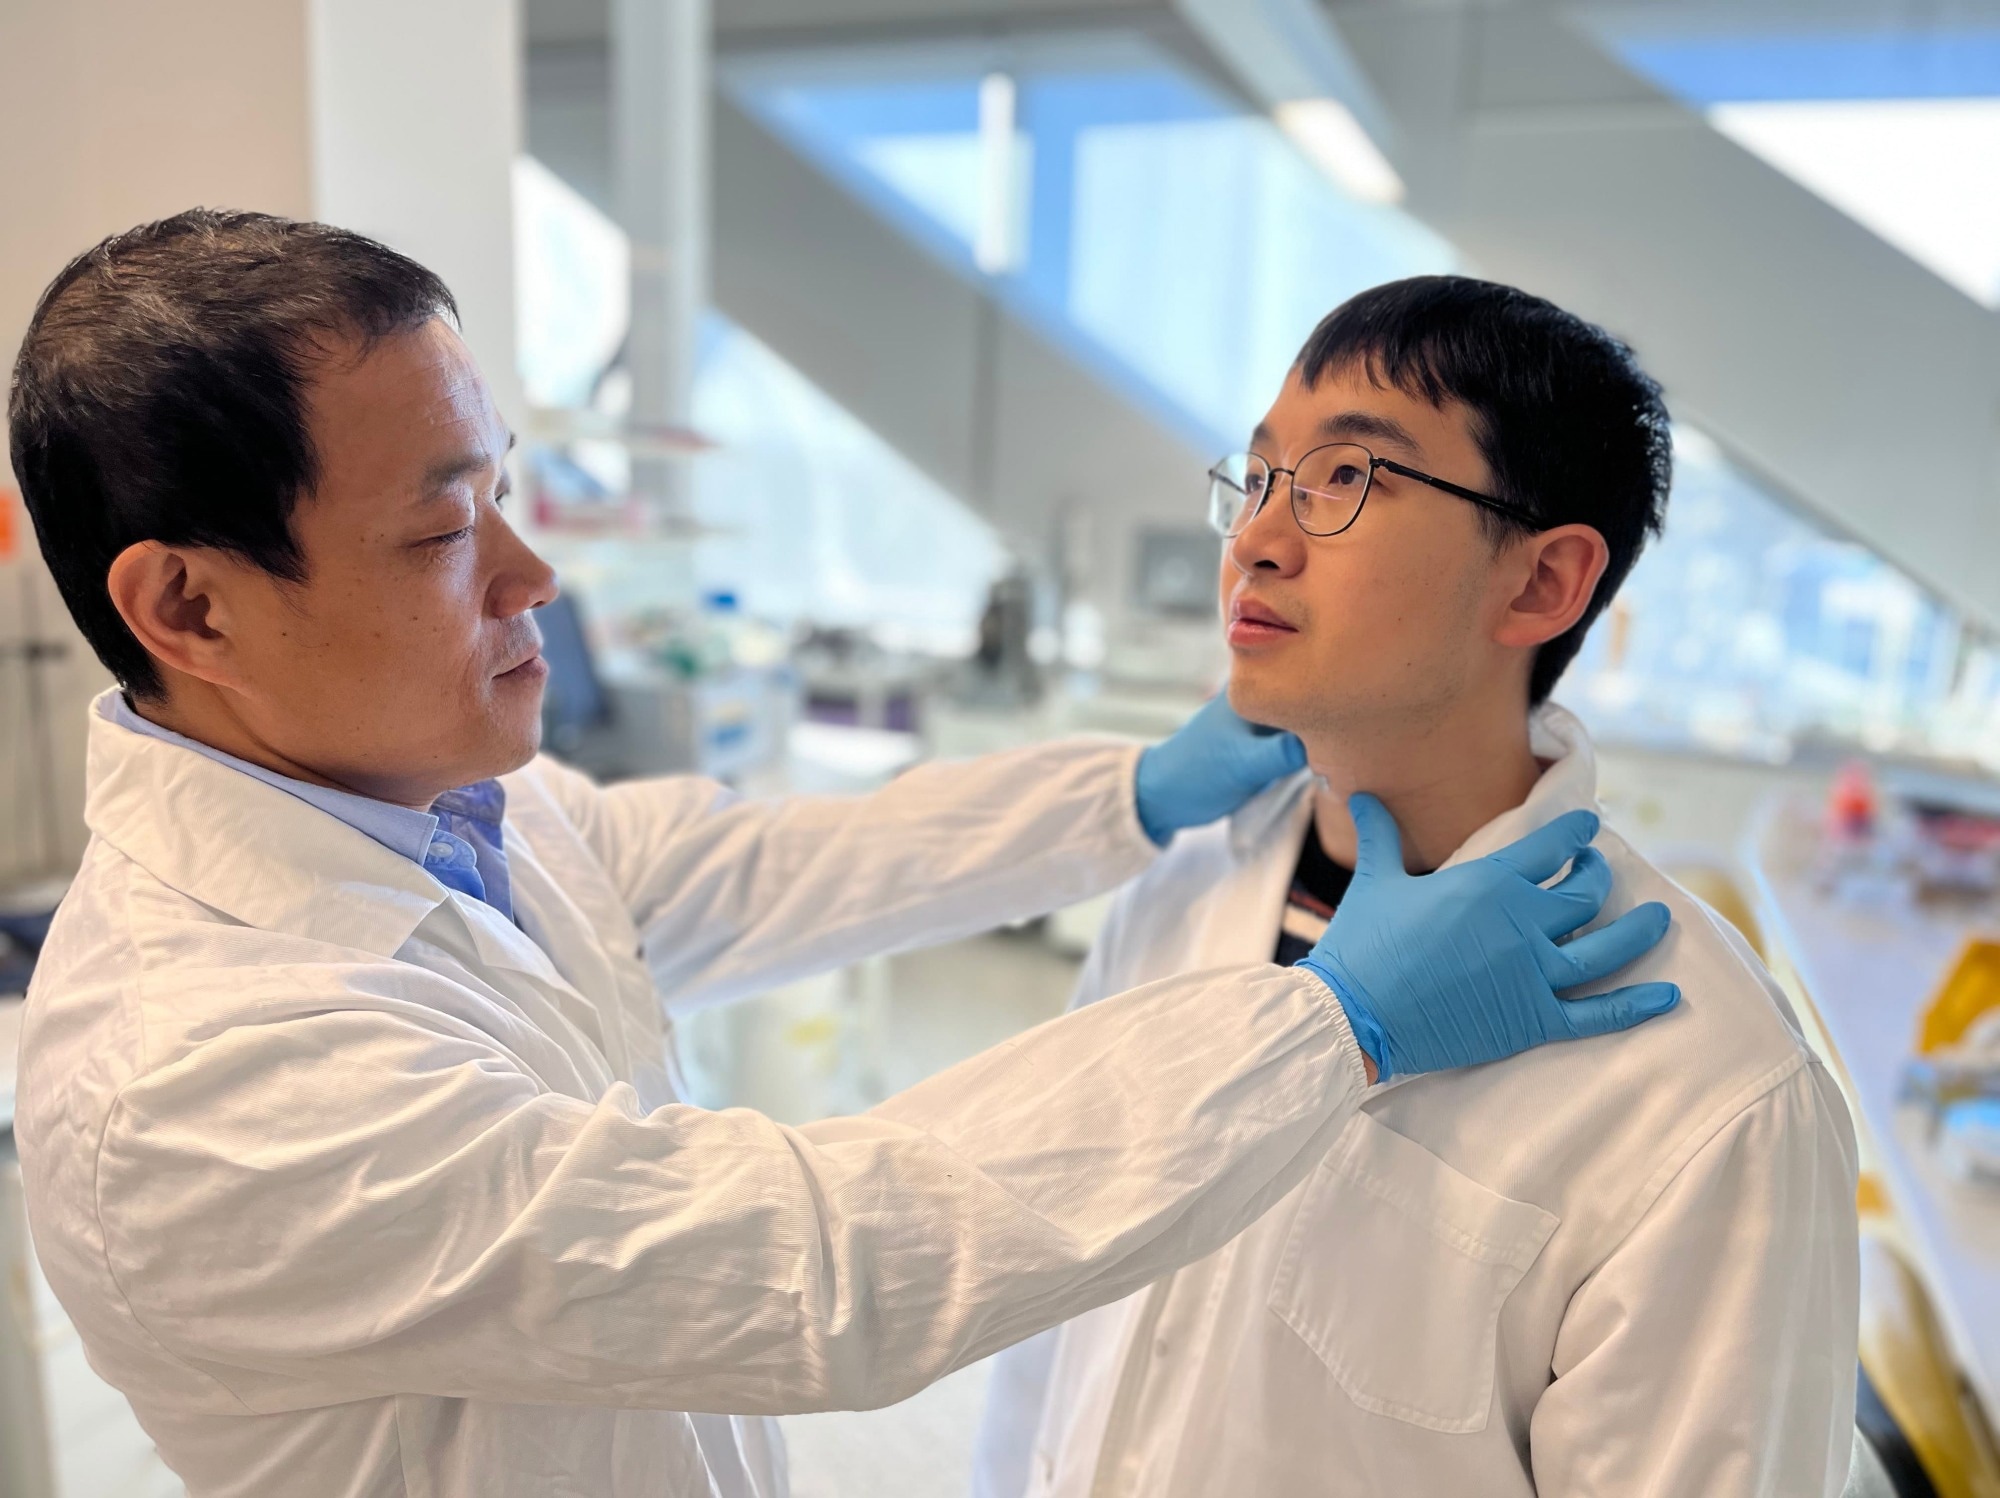 Nanotech-Enabled Skinpatch to Monitor Human Health Signals